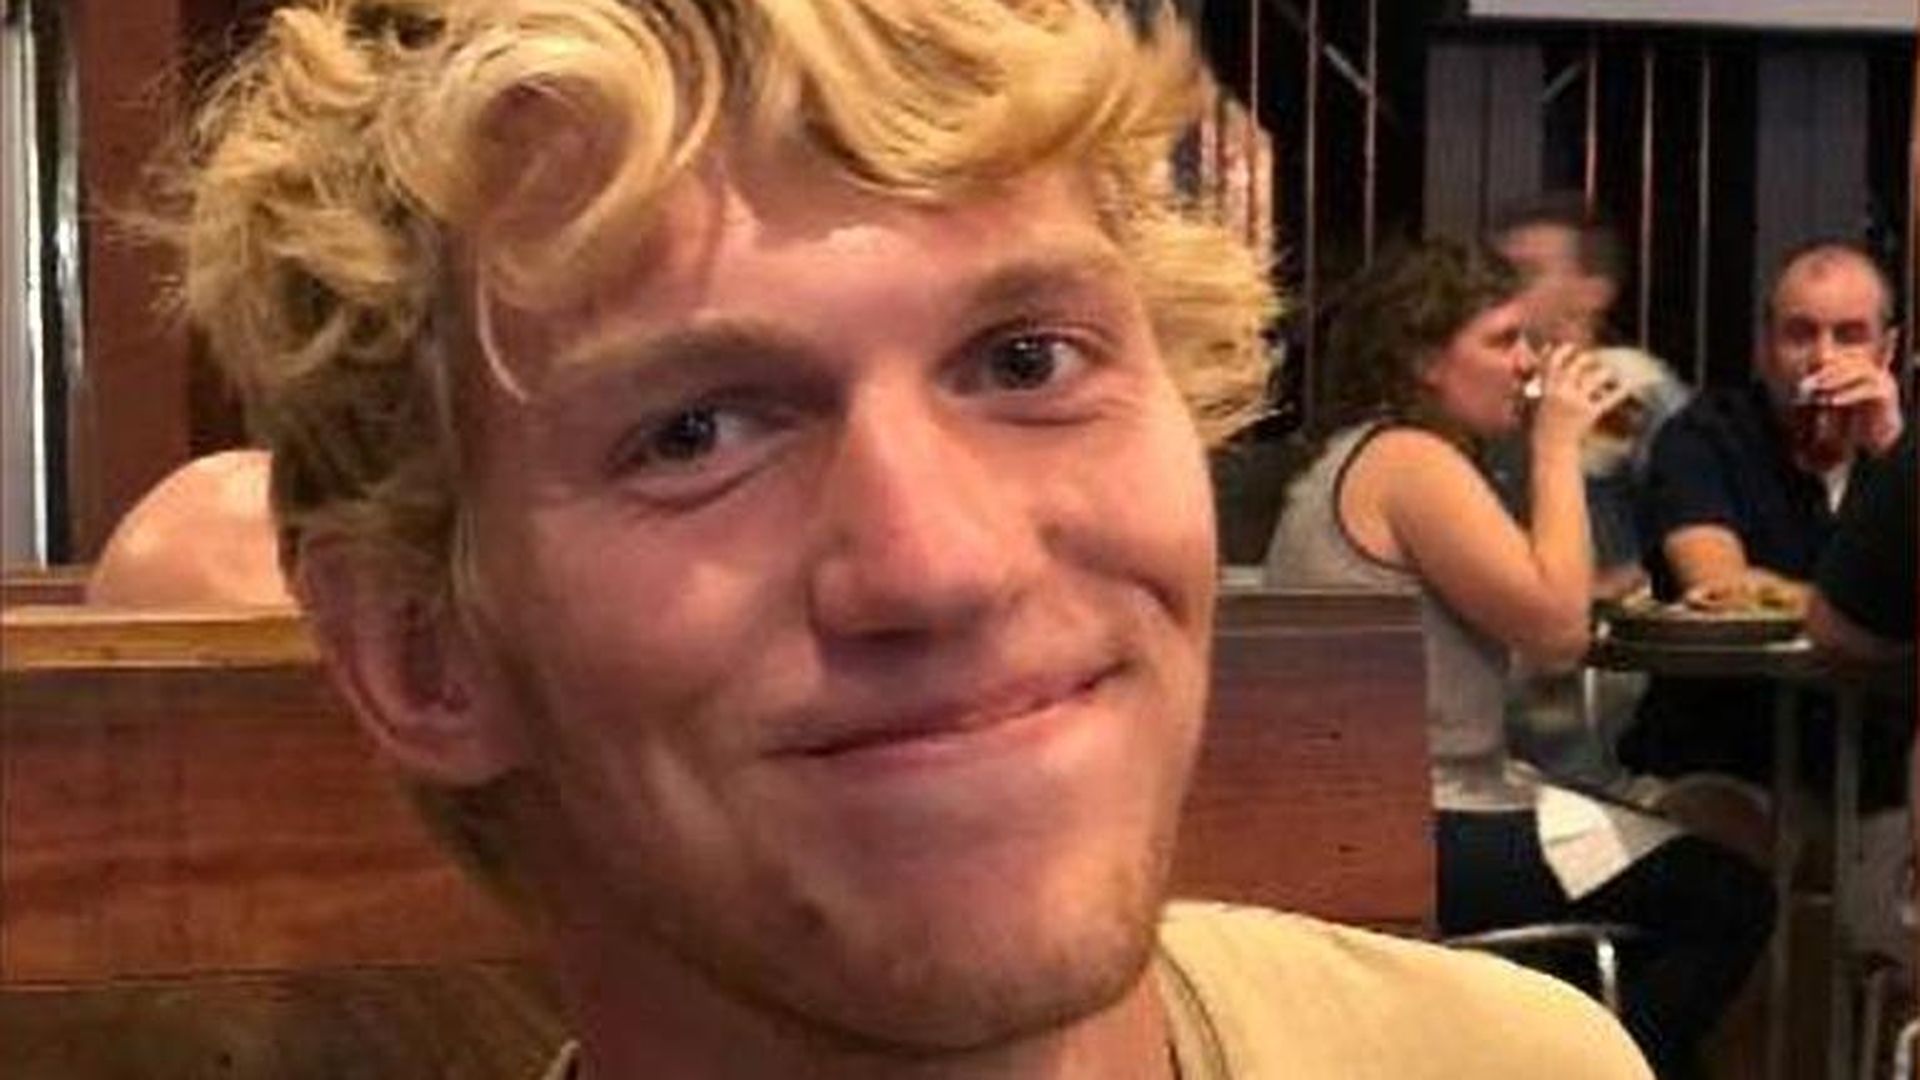 UNCC shooting hero Riley Howell farewelled with military honors - Axios1920 x 1080